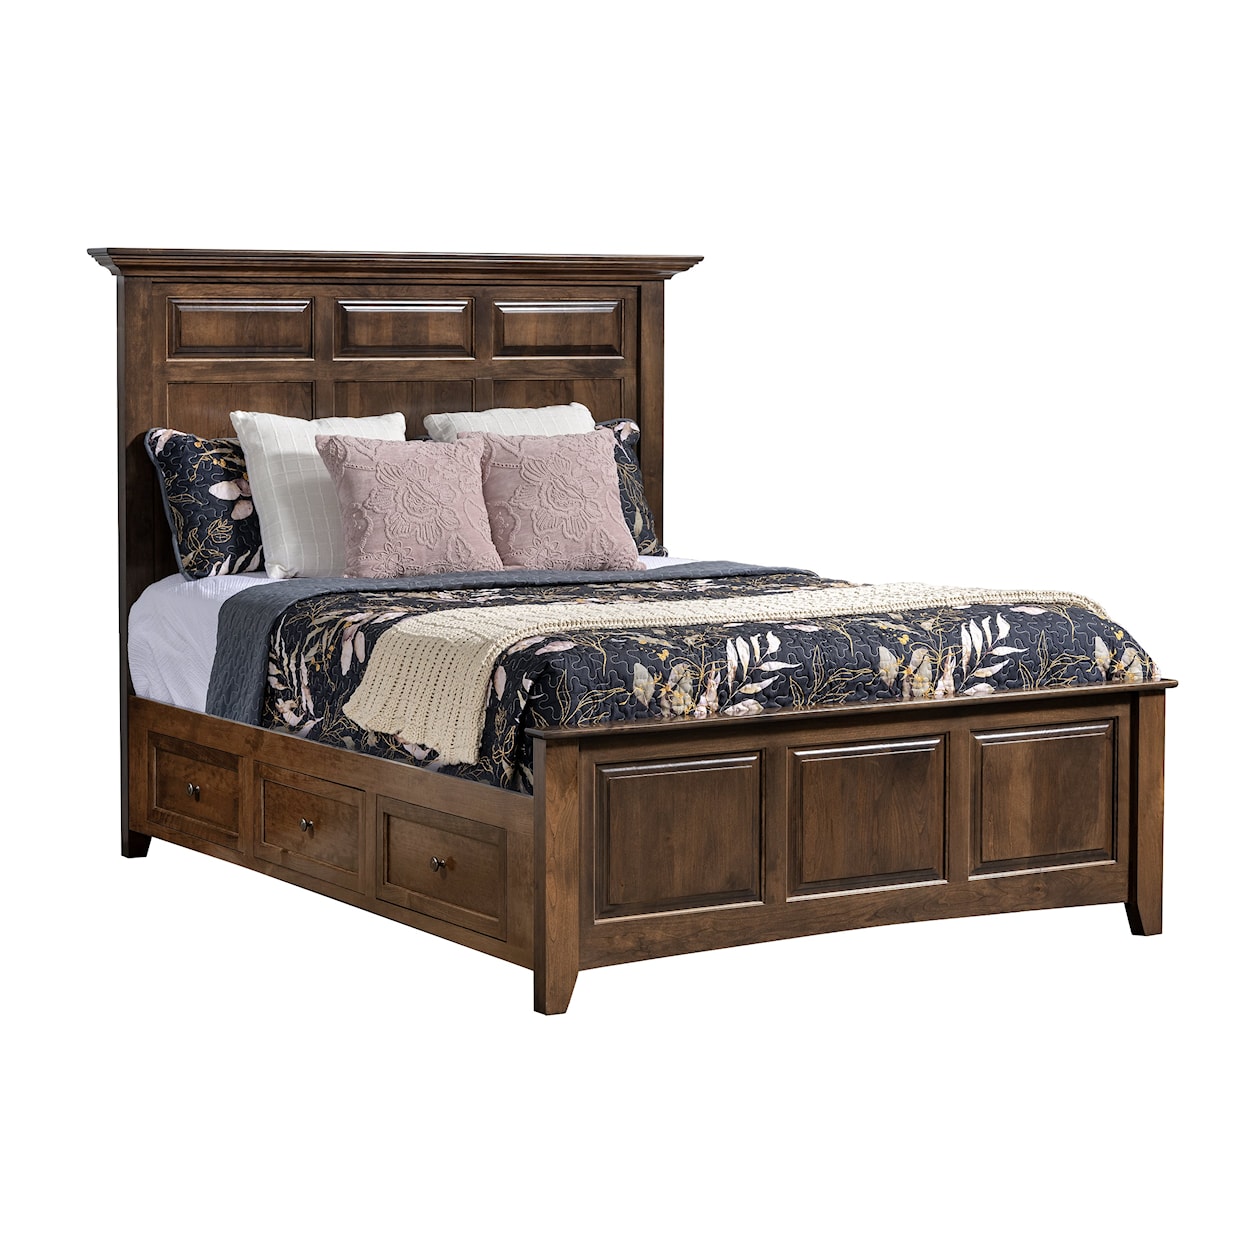 Millcraft Albany California King PANEL BED W/DRAWER UNITS